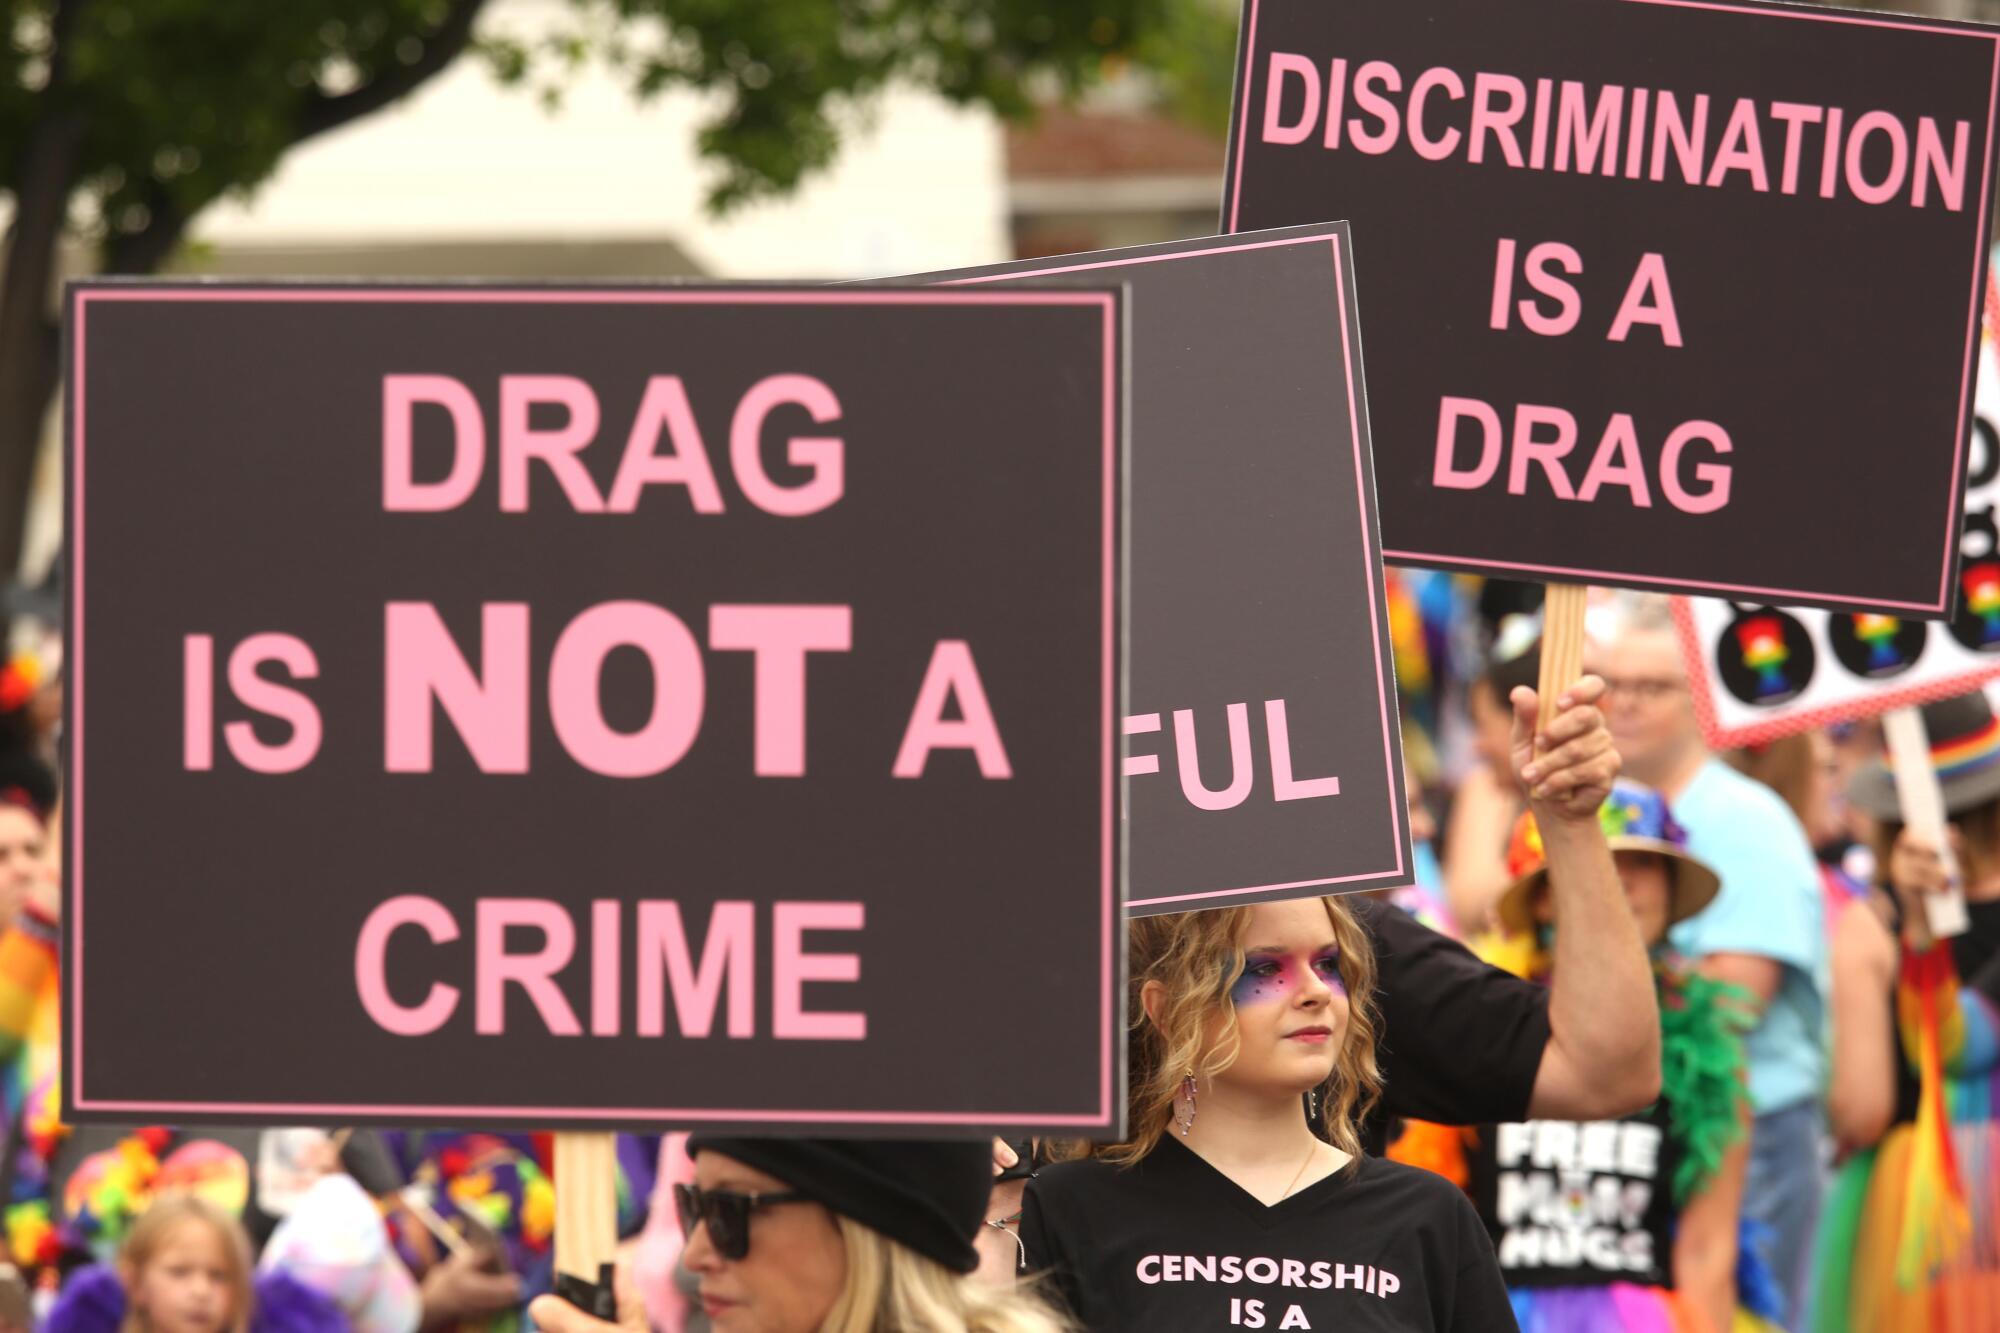 A person amid a crowd holds a sign that says "Drag is not a crime."